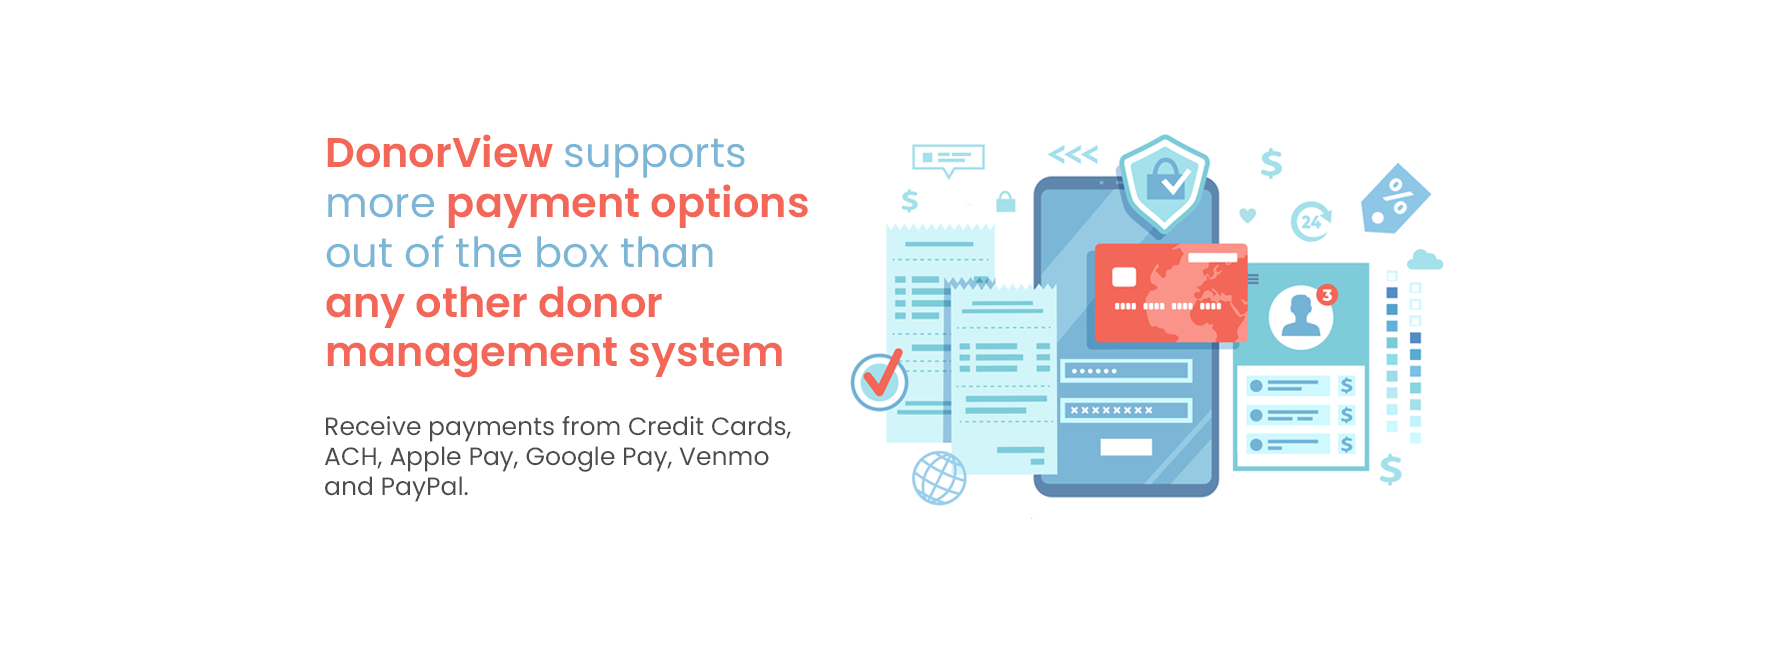 DonorView supports more payment options out of the box than any other donor management system